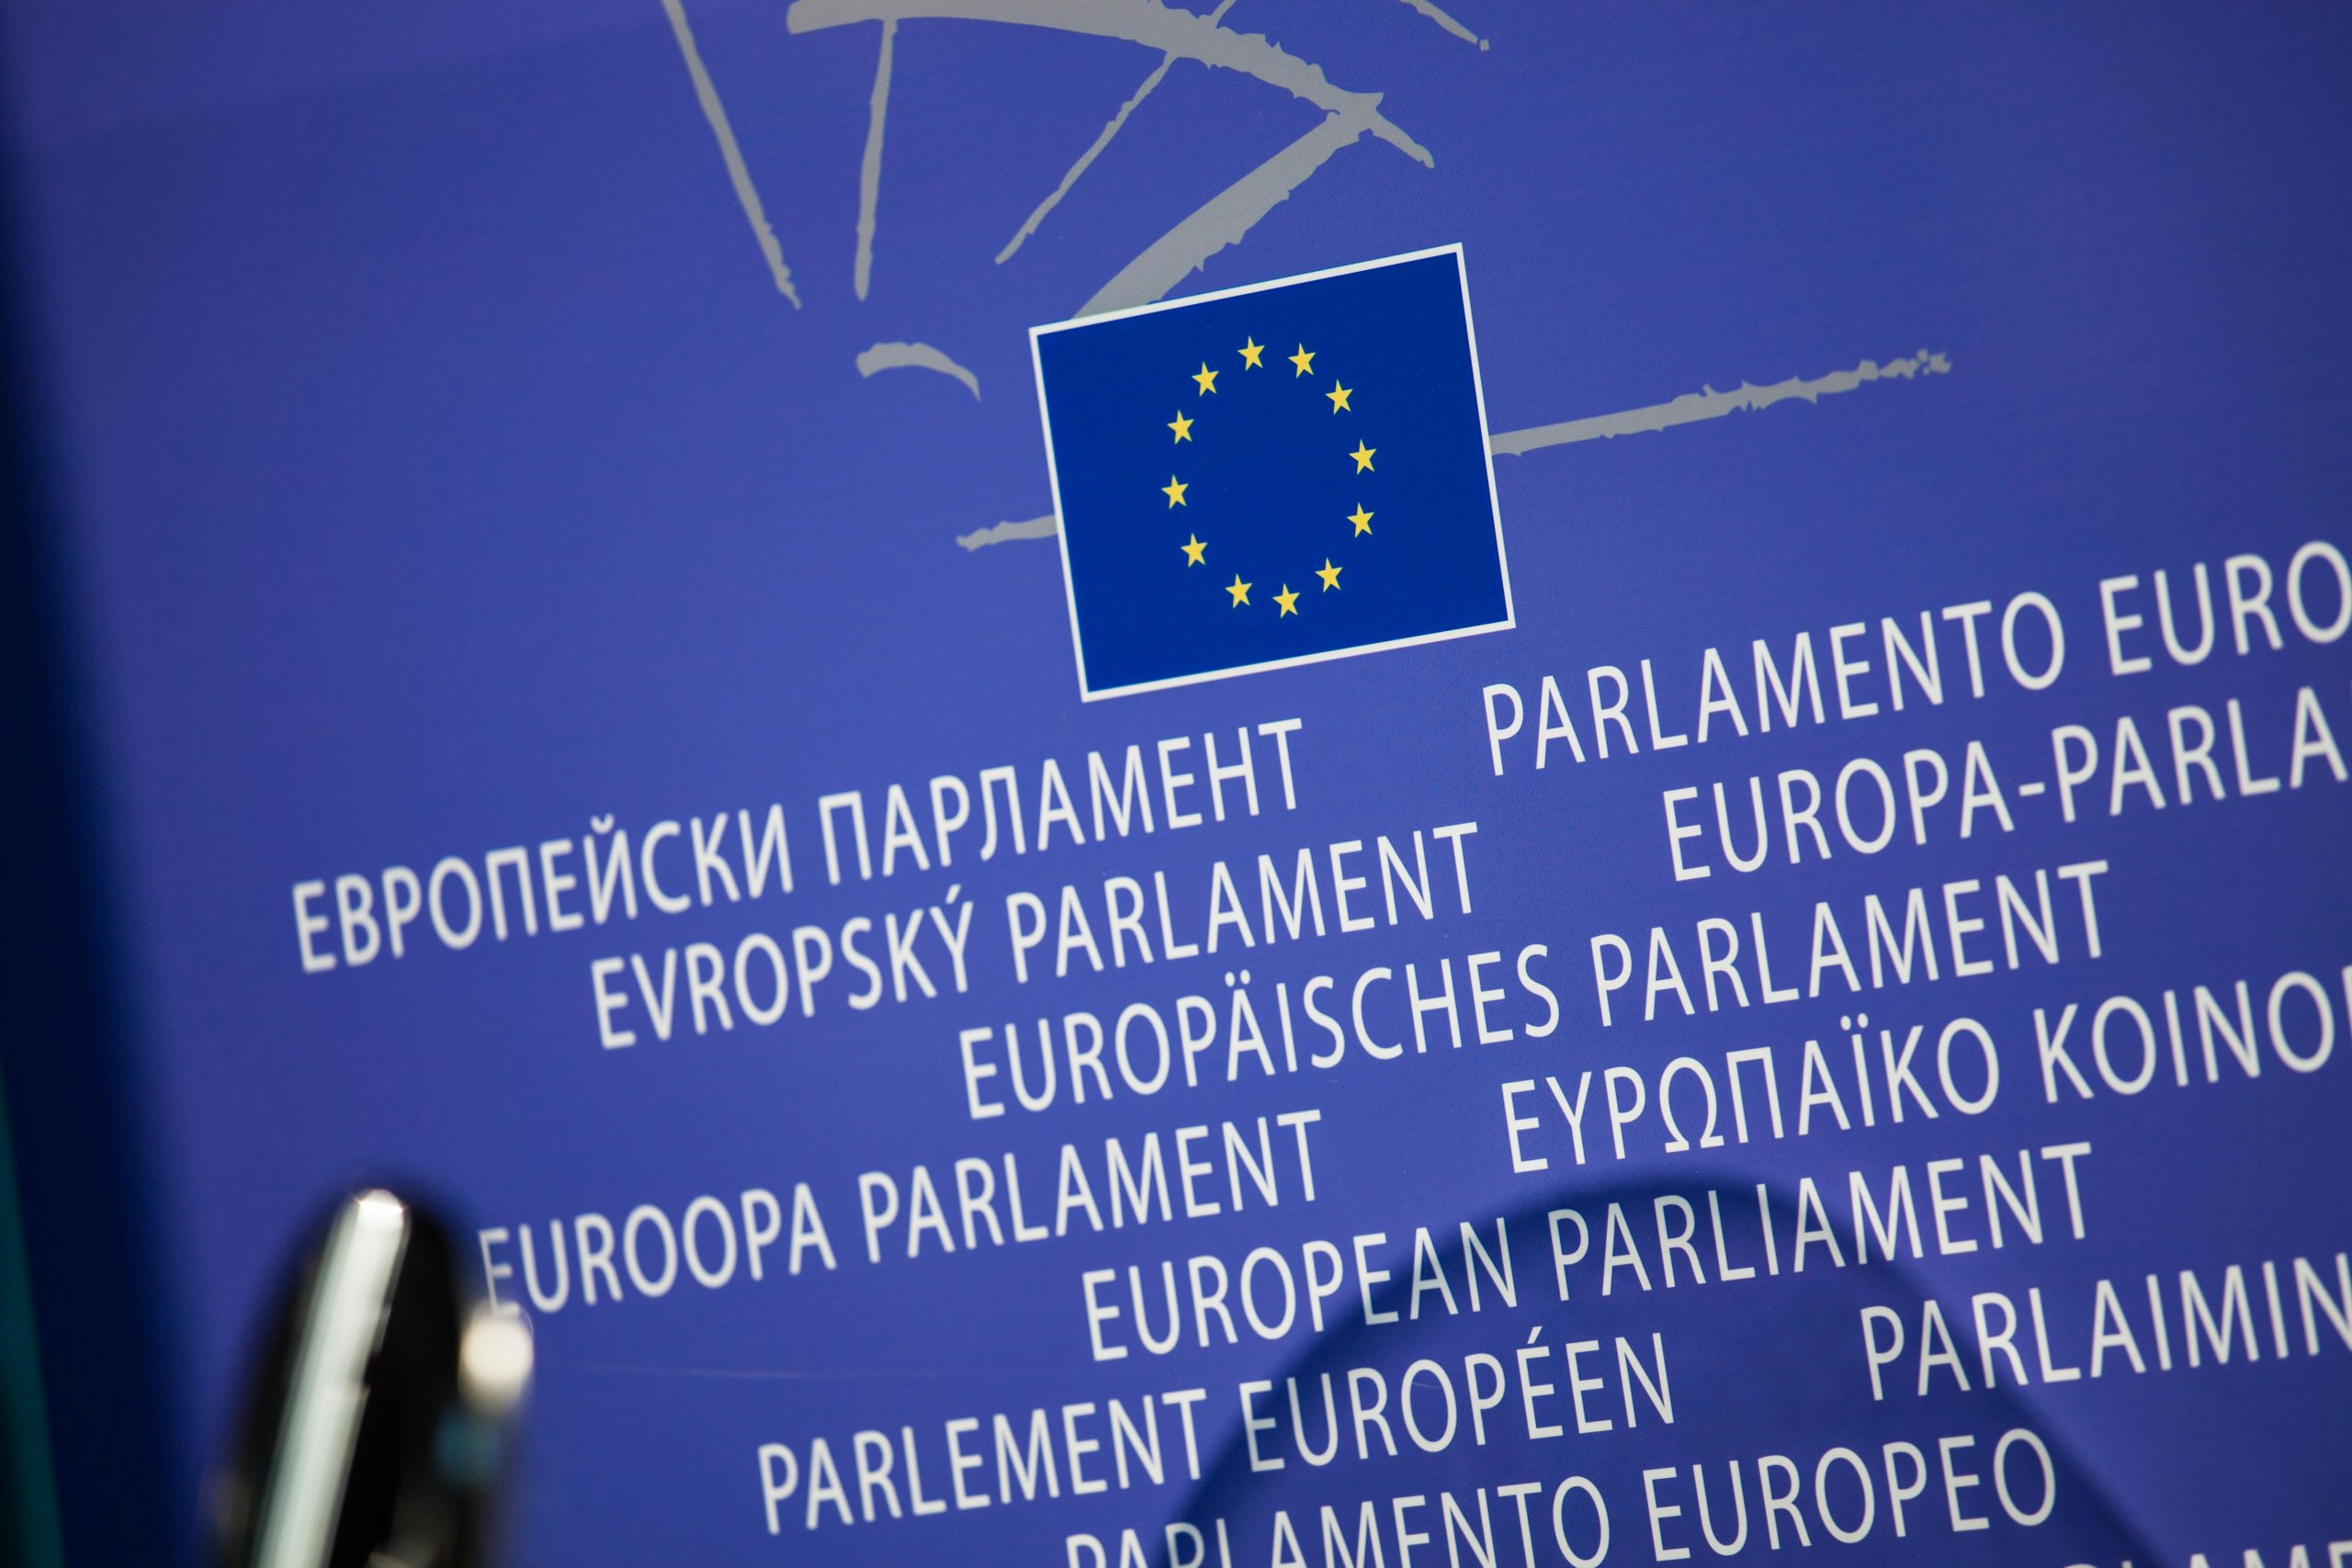 EU enacts new regulation to prohibit re-export of goods to Russia